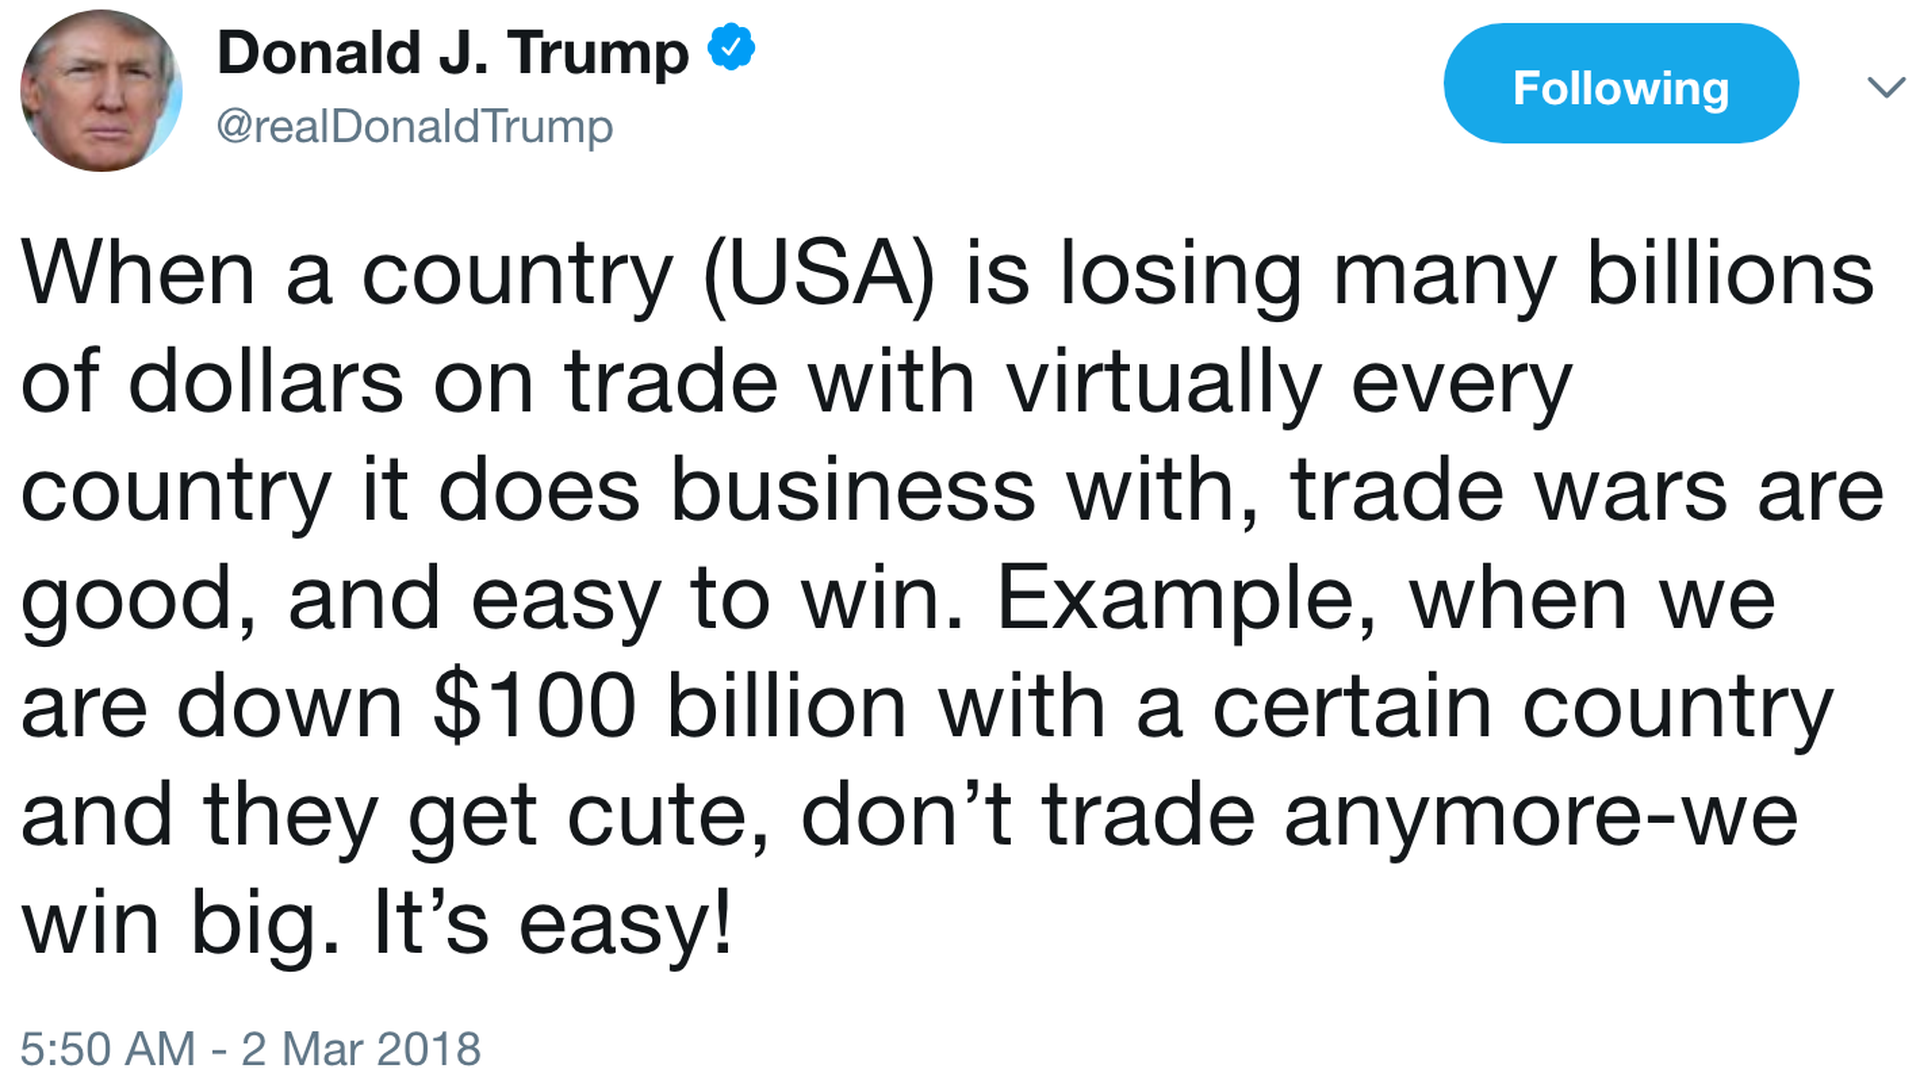 Image result for trump tariffs "so easy to win"